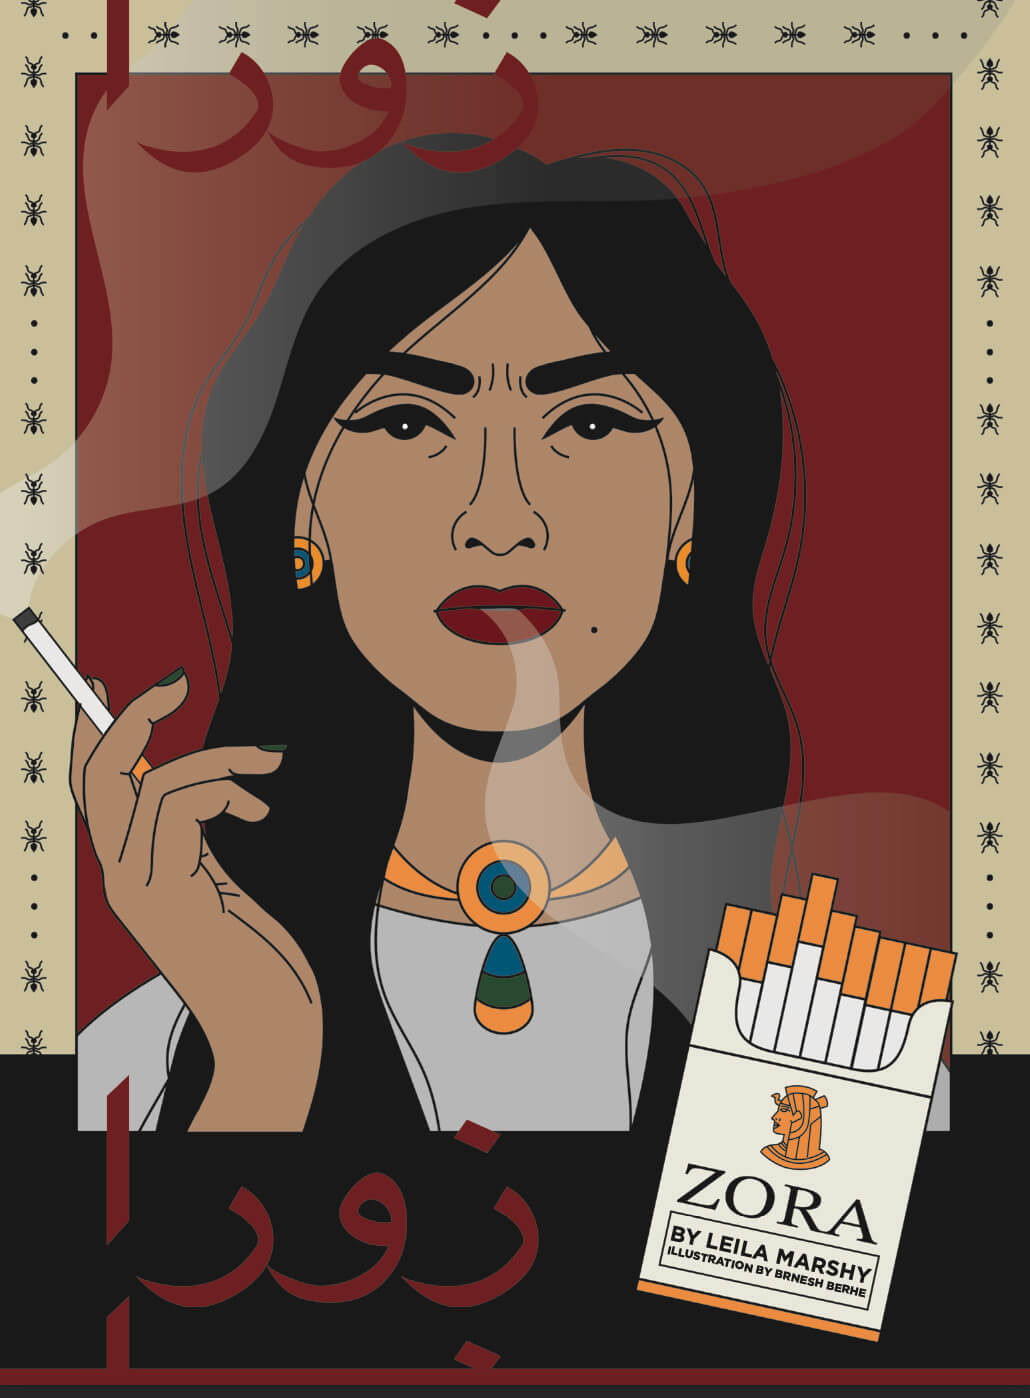 A woman with long black hair and a thick gold necklace exhales smoke from the cigarette held in her right hand. A package of cigarettes in the lower corner reads "Zora." Spiders crawl down the side of the picture.